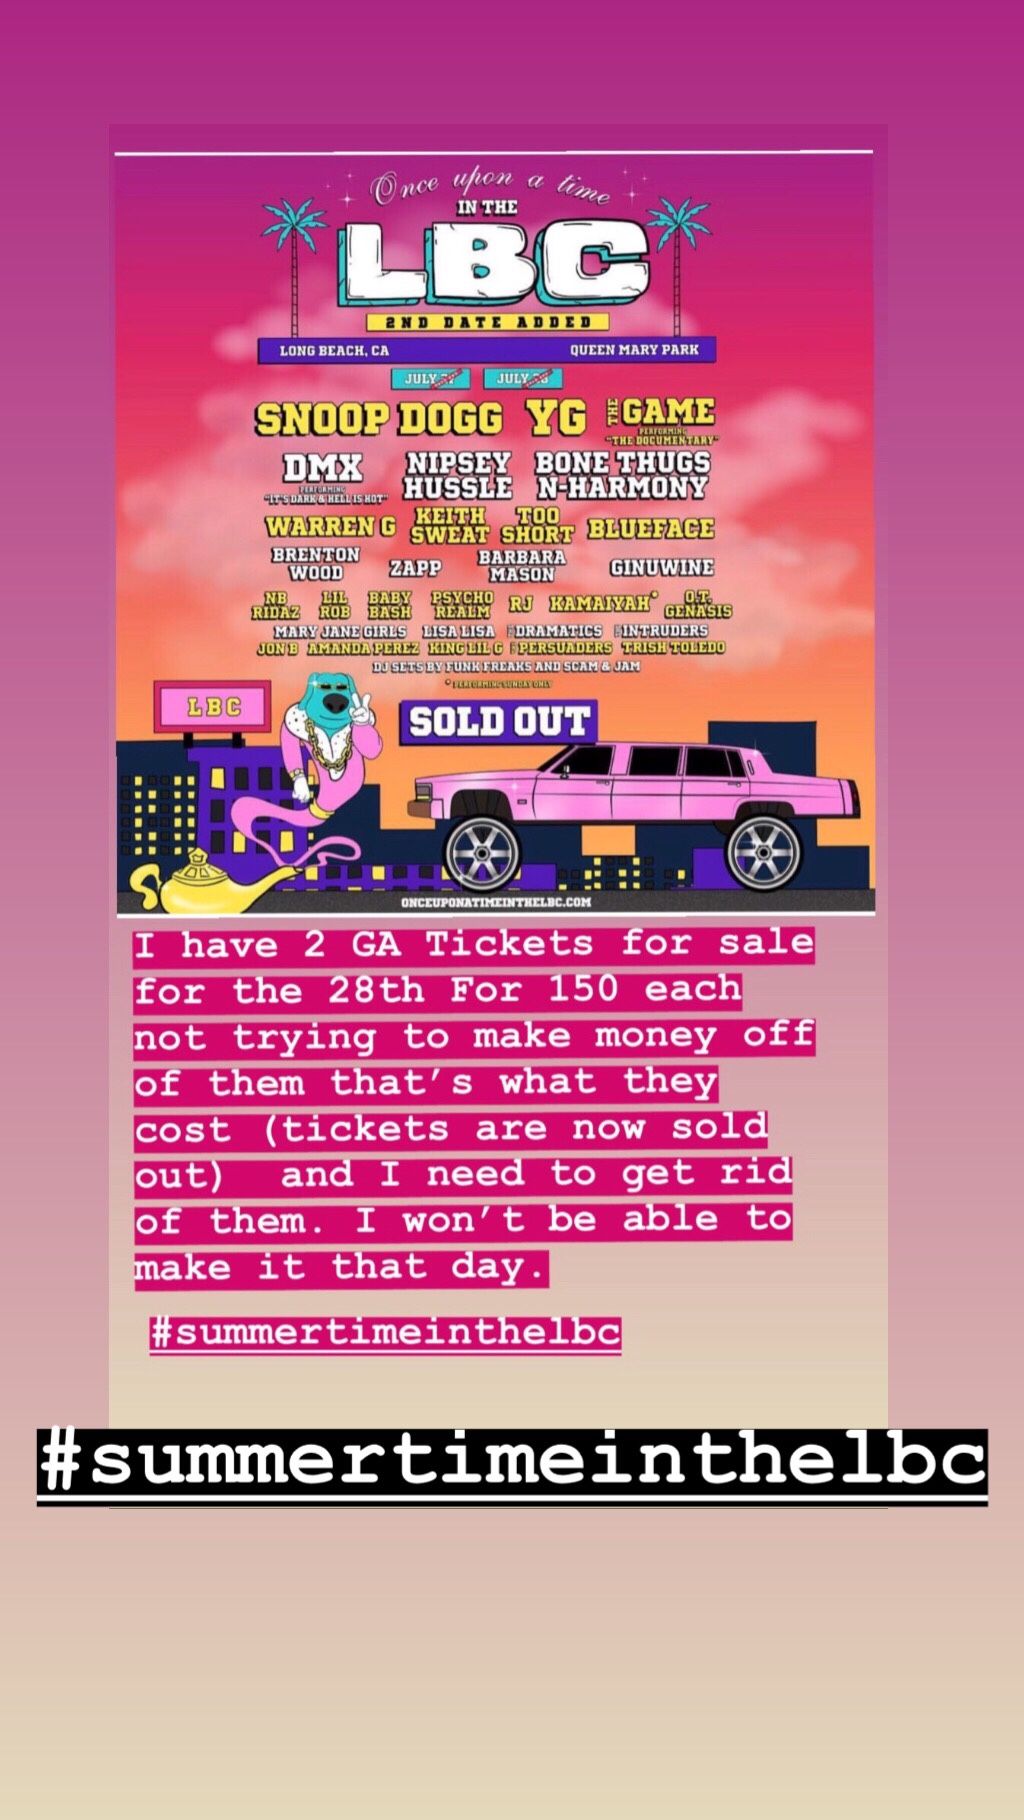 Summertime in the LBC 2019 tickets (July 28th)